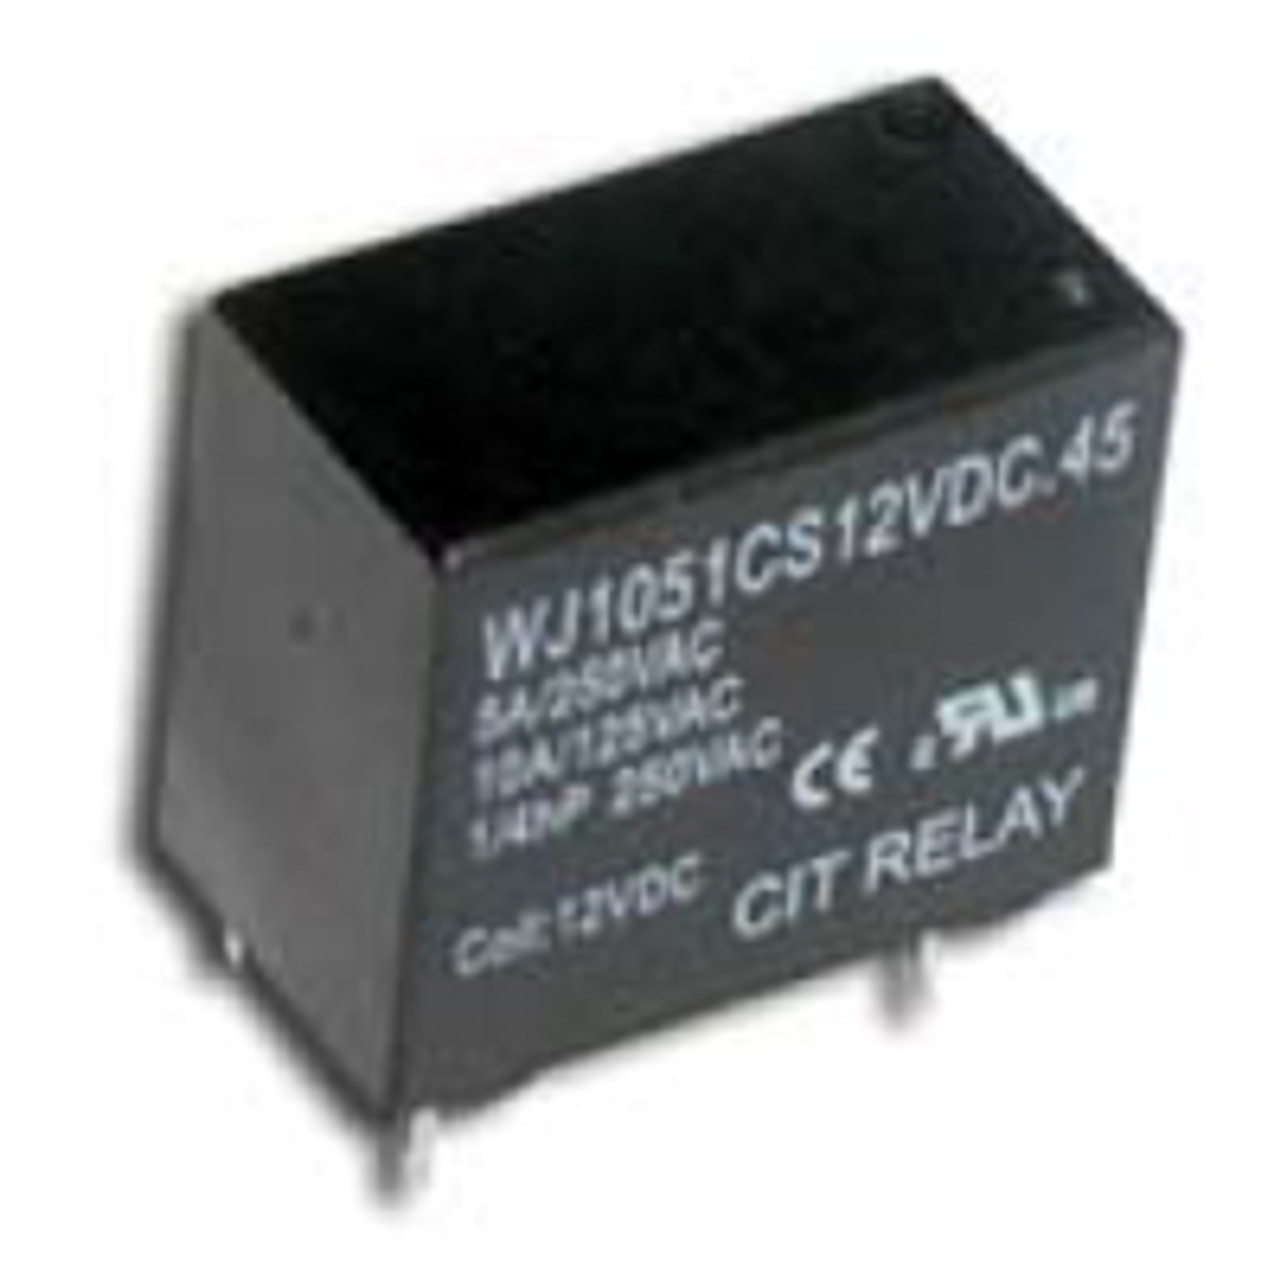 CIT Relay and Switch J1051A18VDC.45 General Purpose Relays